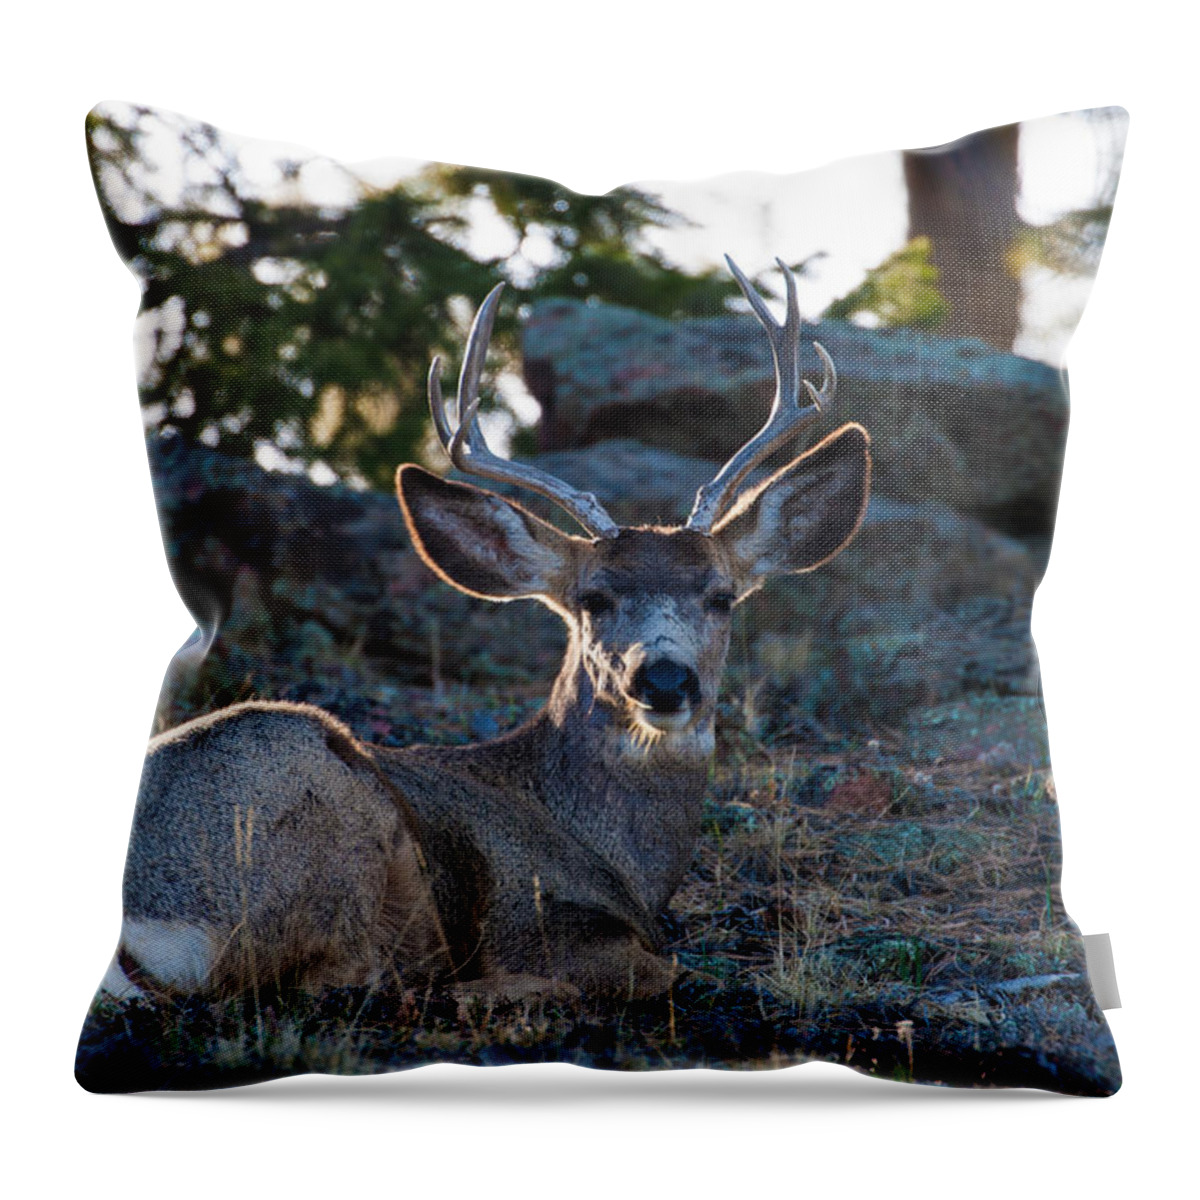 Mule Deer Throw Pillow featuring the photograph Bed Down For The Evening by Mindy Musick King